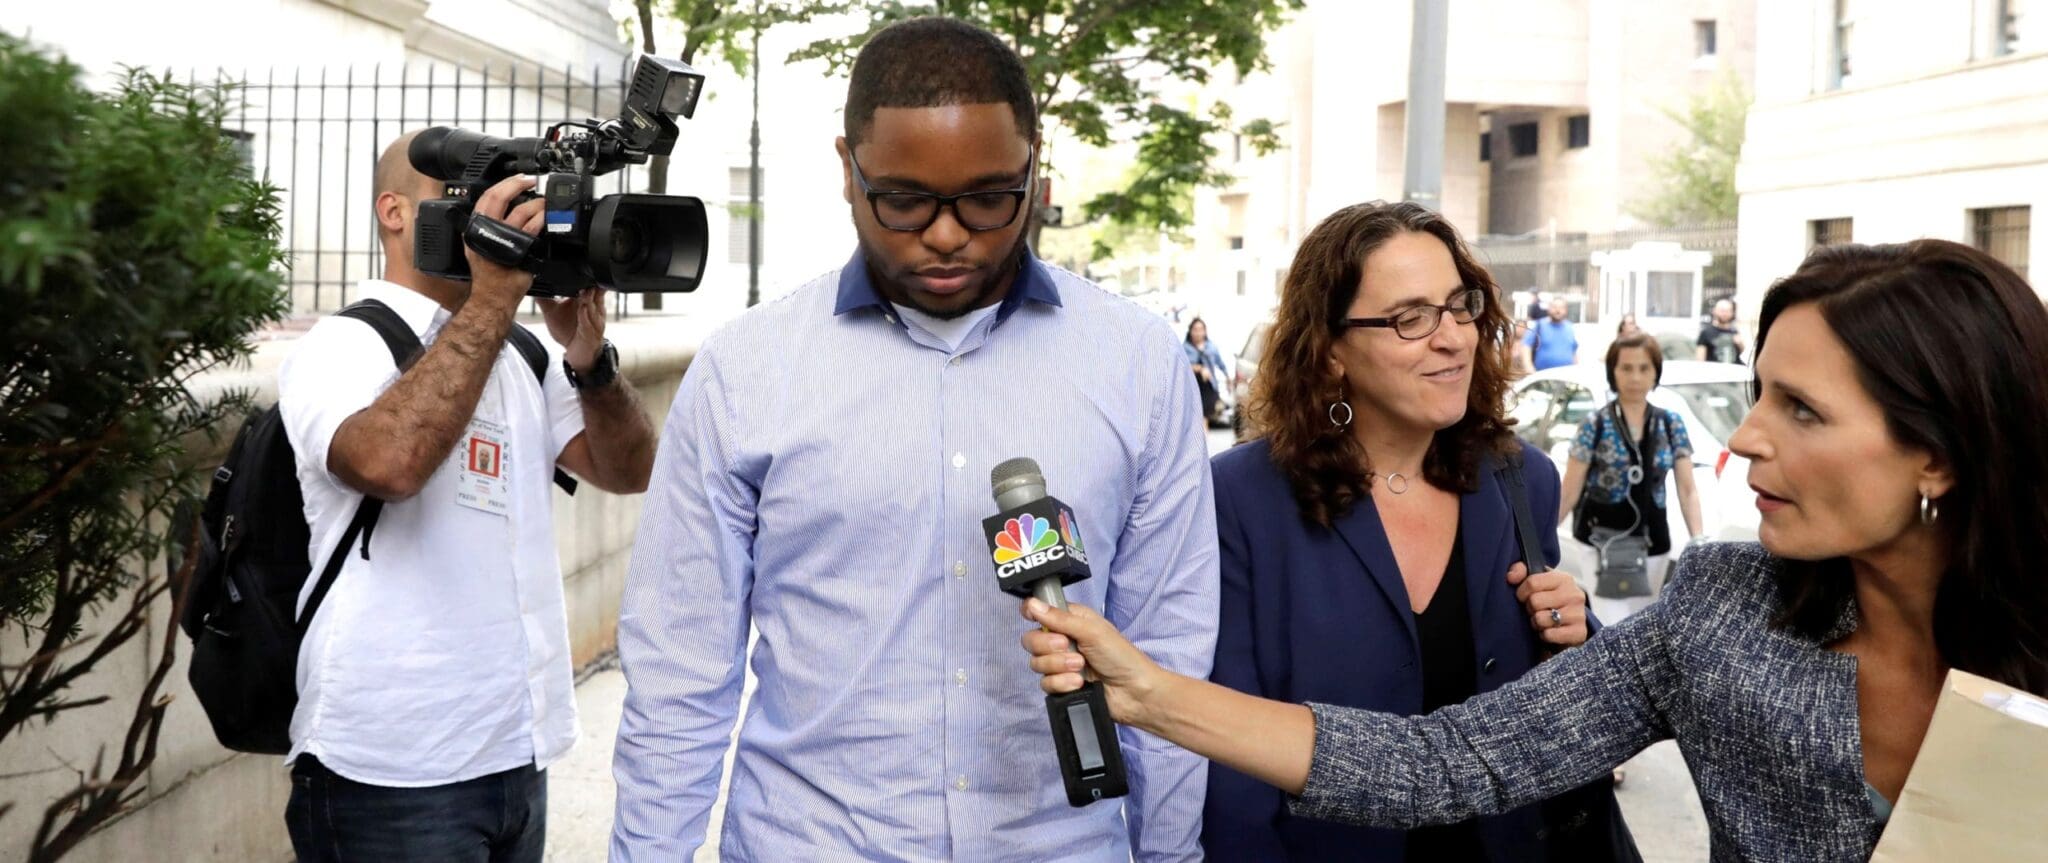 Christian Dawkins, a former ASM Sports agent exits the Manhattan Federal Courthouse, after being arrested for bribery and fraud in connection with college basketball recruiting, in New York